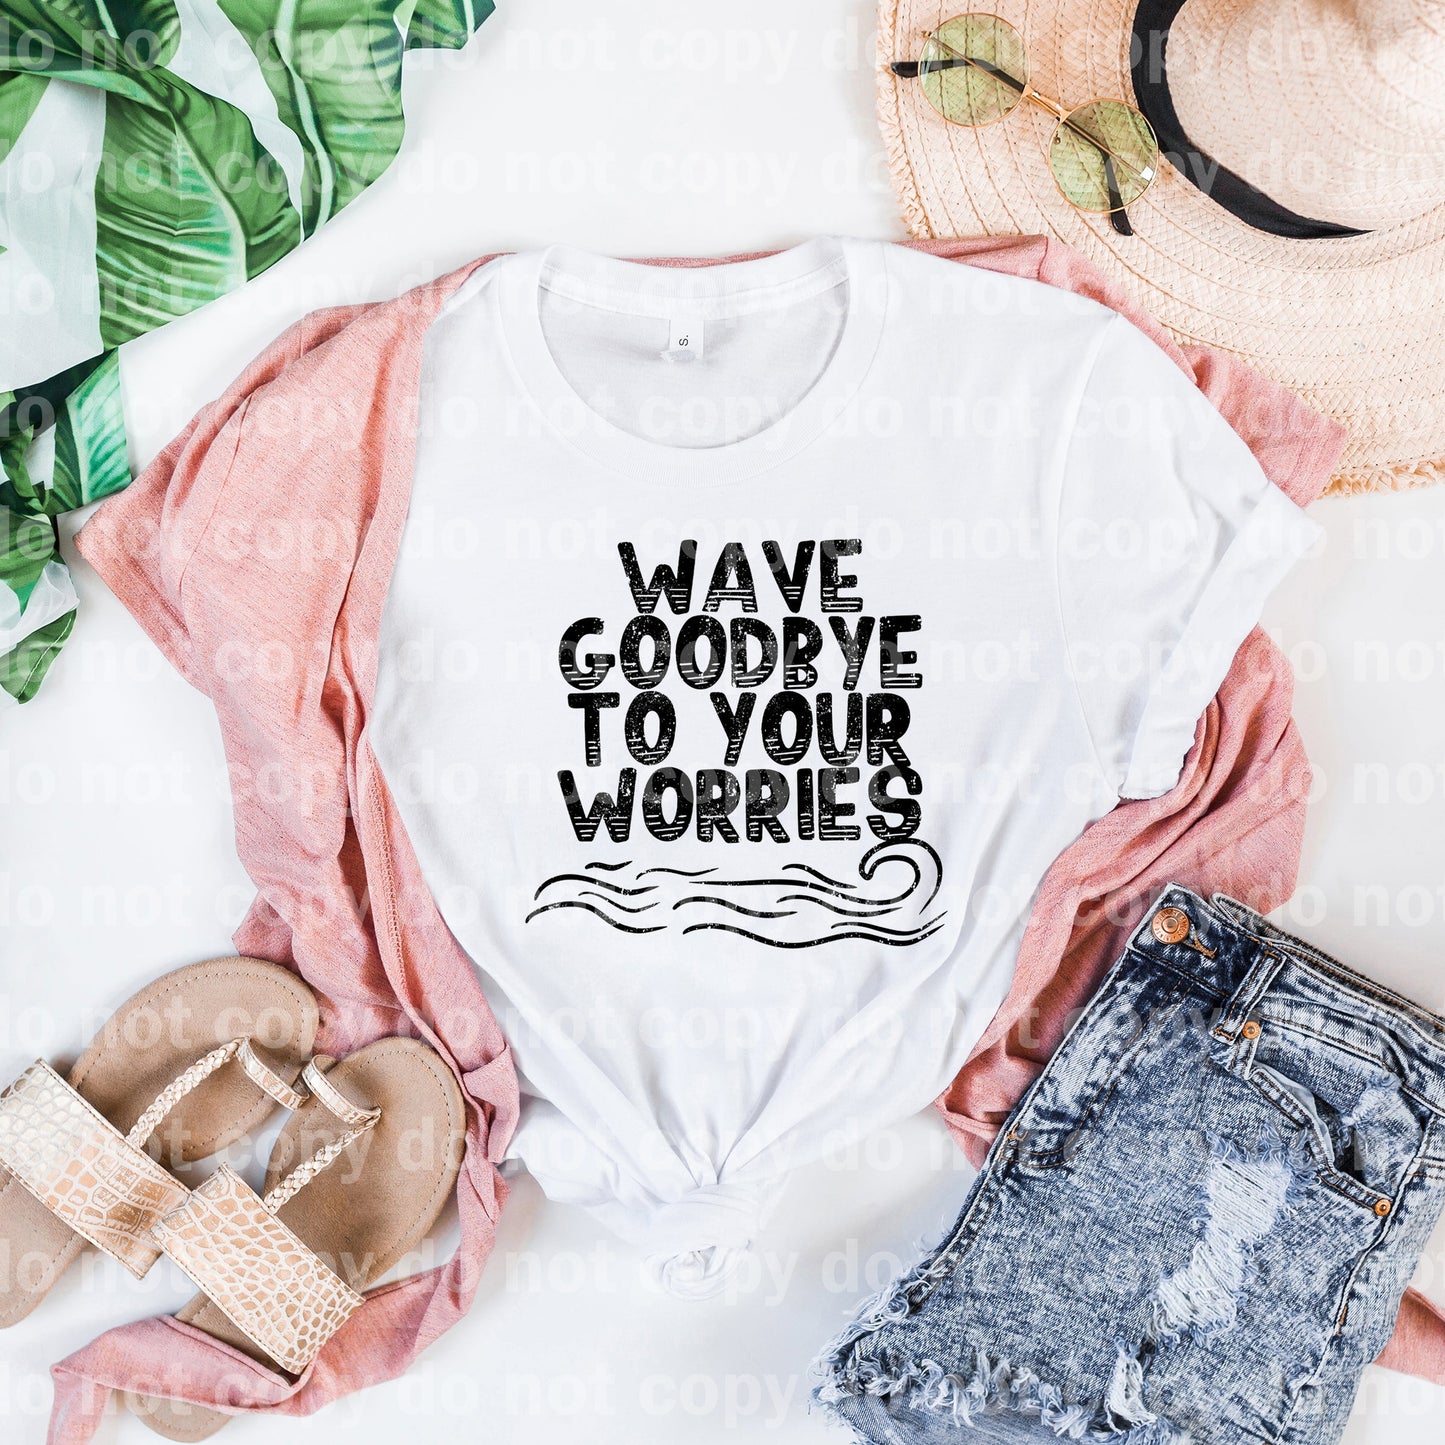 Wave Goodbye To Your Worries Distressed Full Color/One Color Dream Print or Sublimation Print